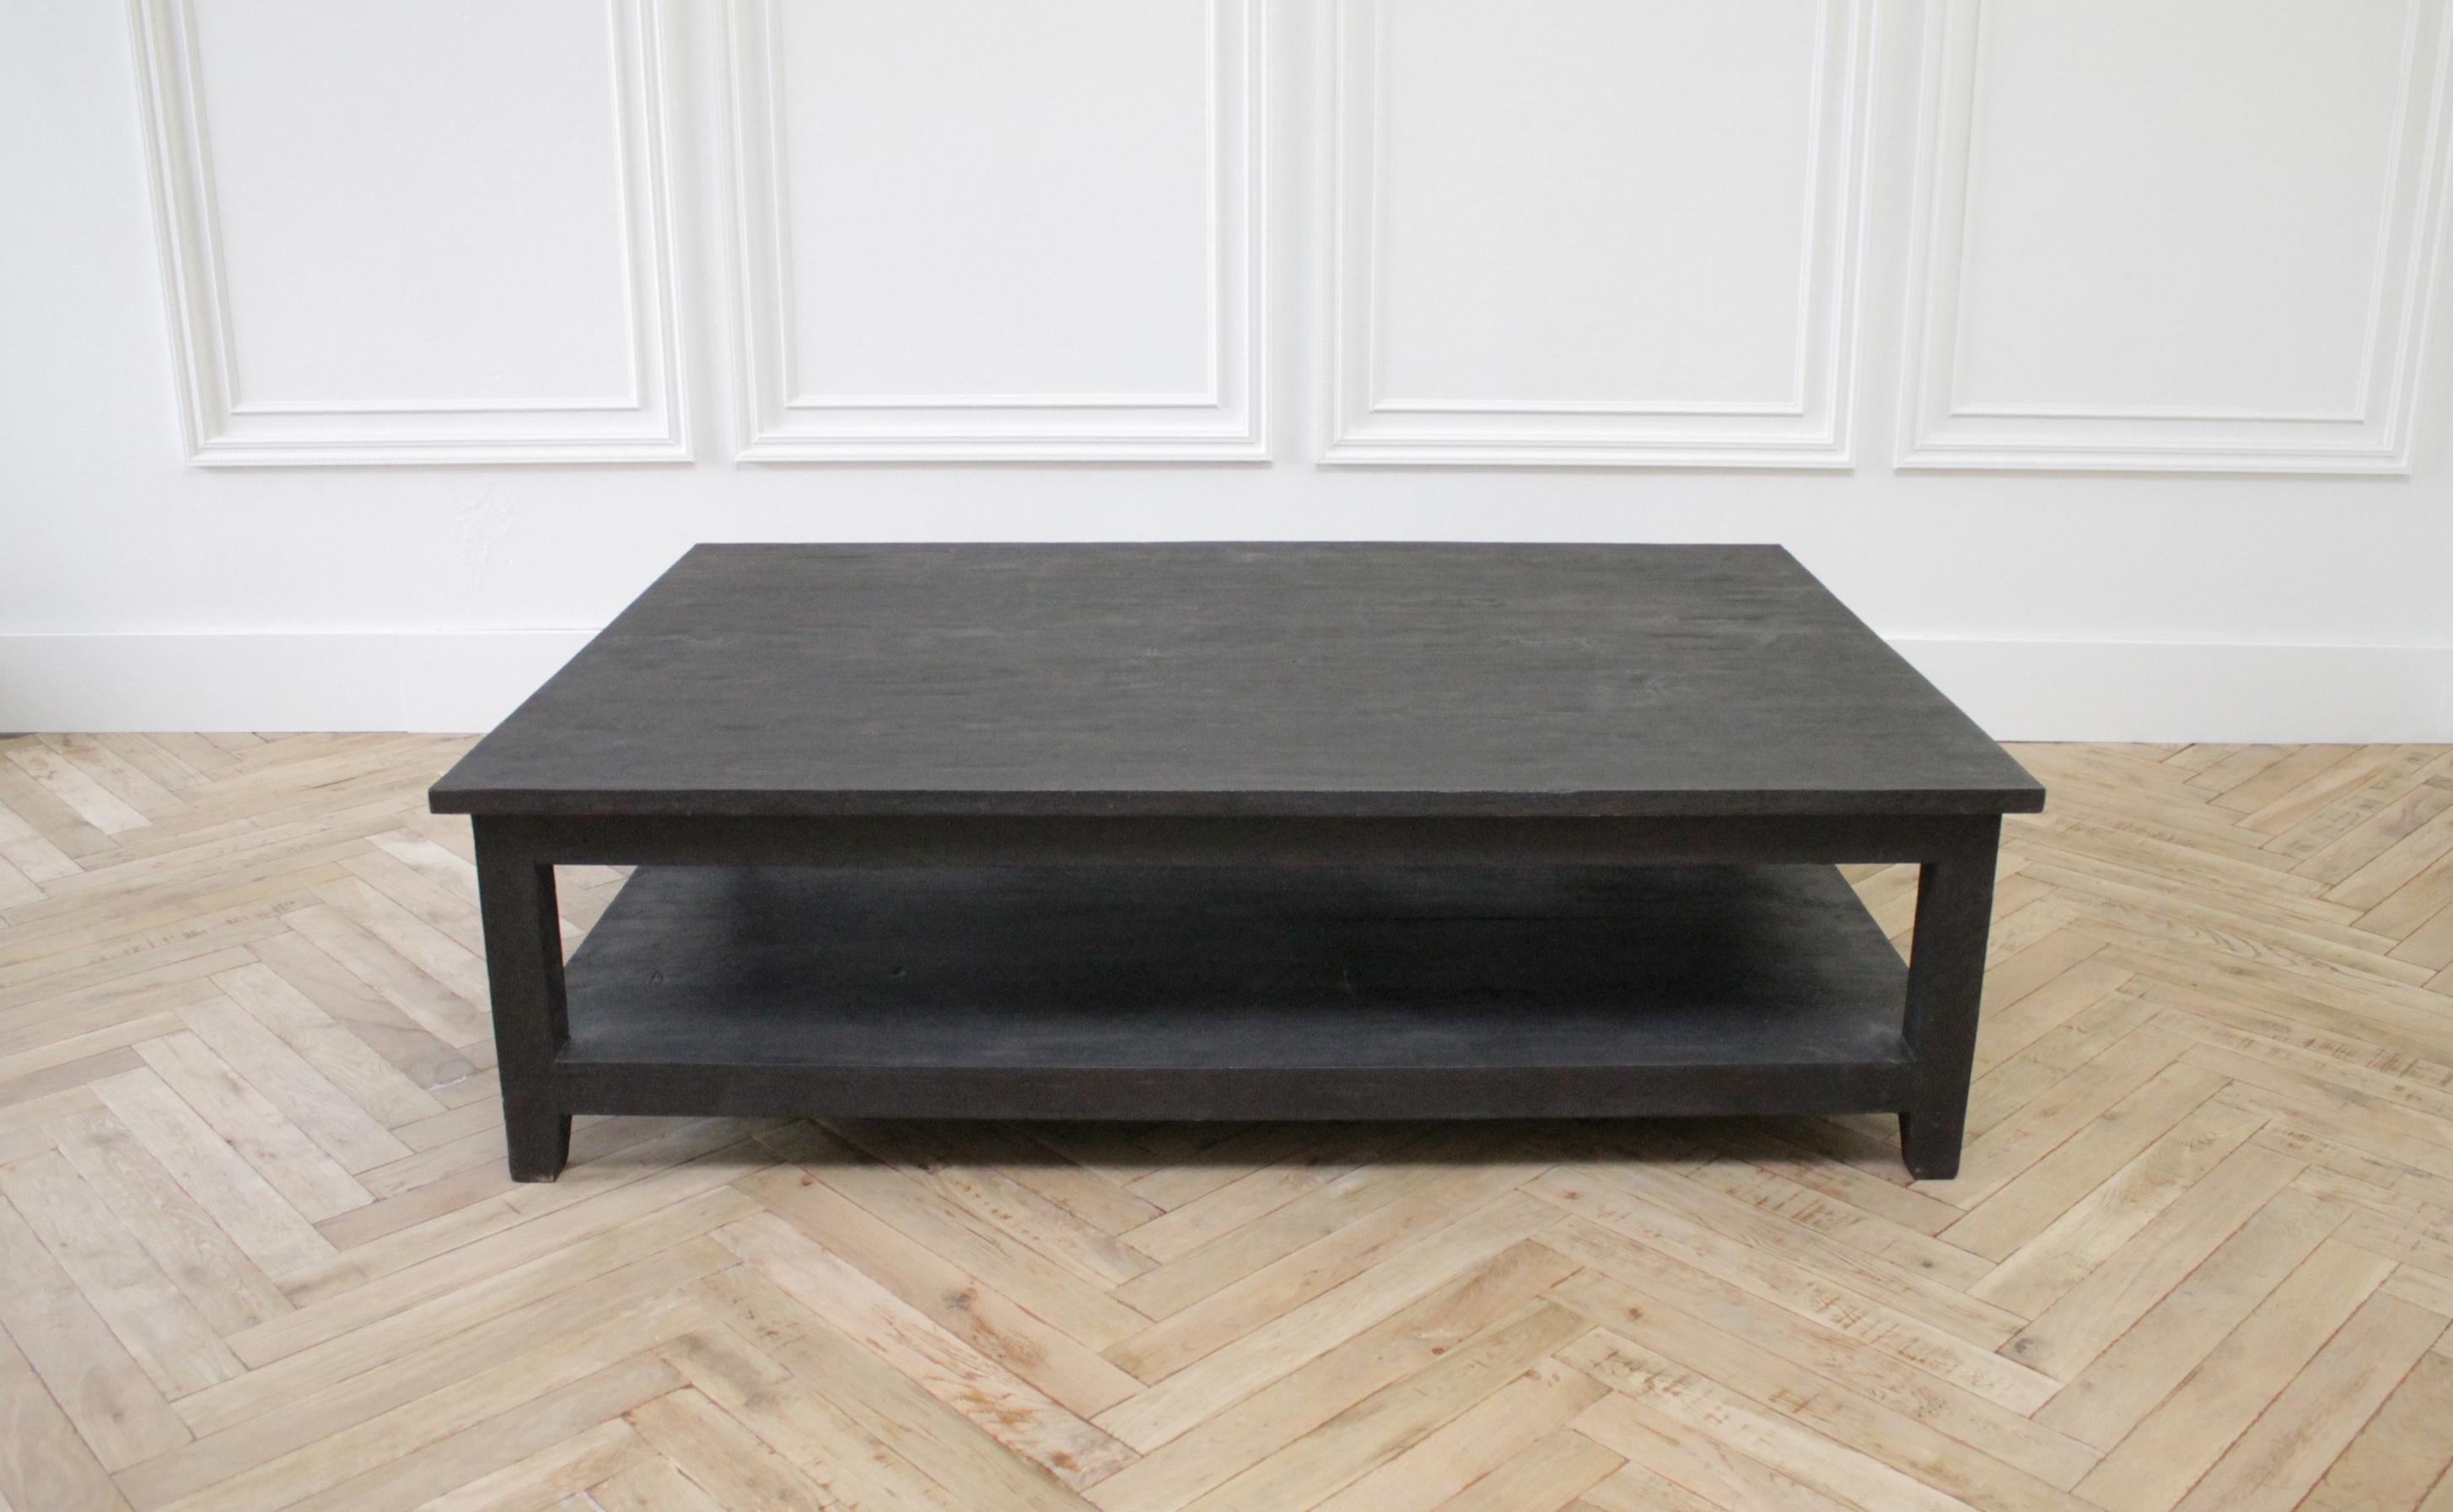 21st century large ebony stained coffee table
Solid wood, top has a distressed lightly hand scraped finish.
Measures: 64